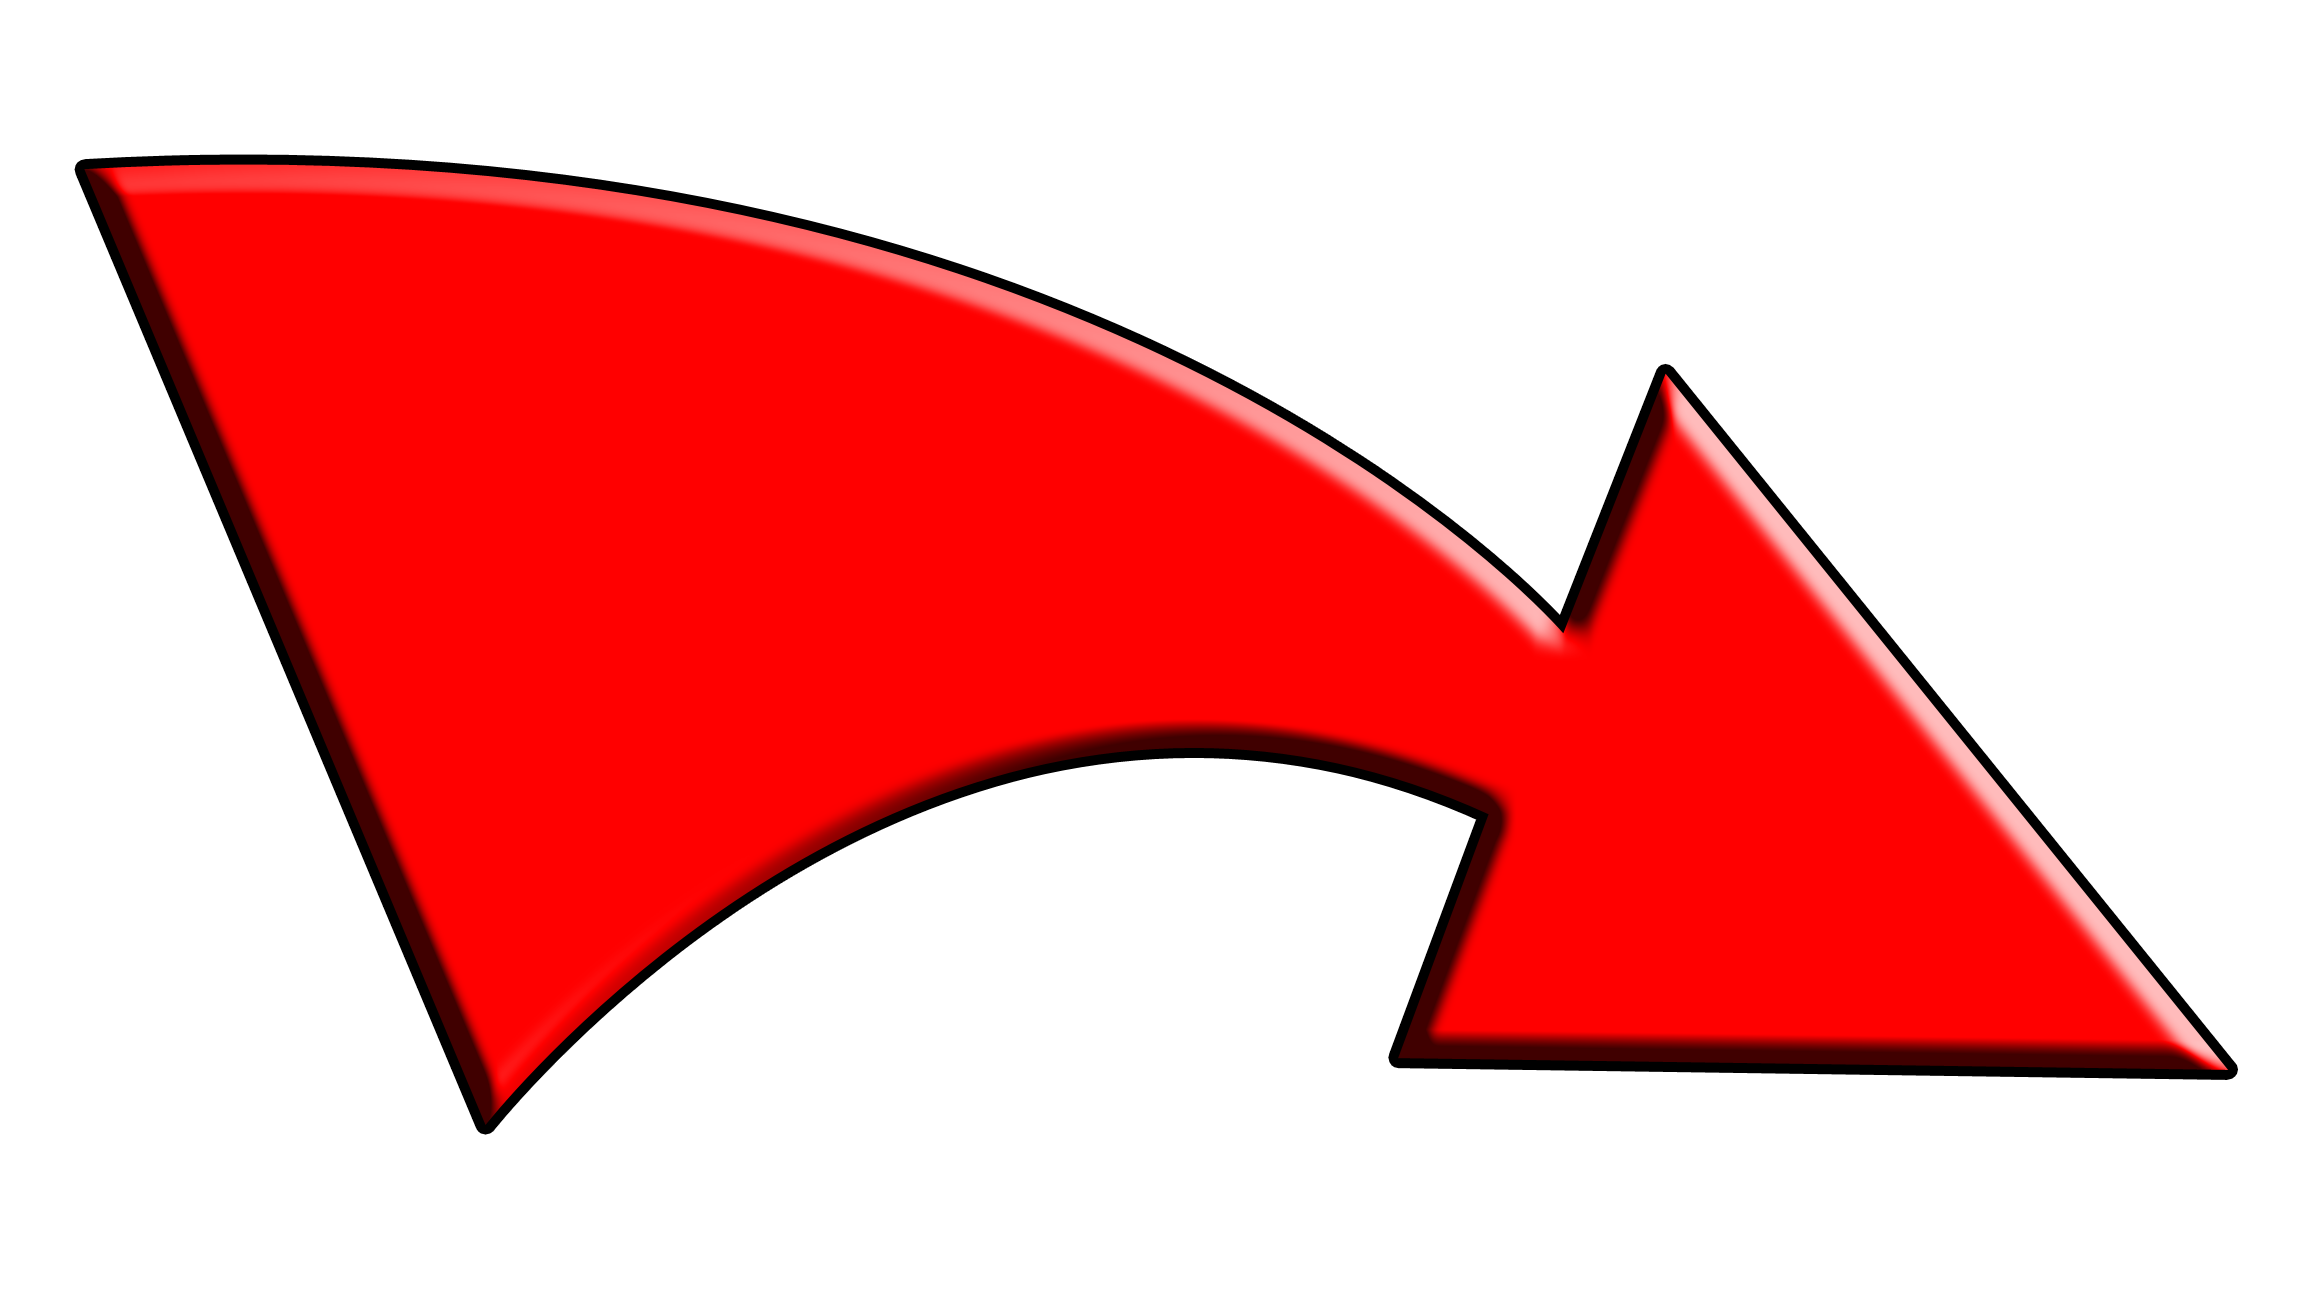 Clip Arts Related To : Red Arrow Curved Arrow Mark Png. 